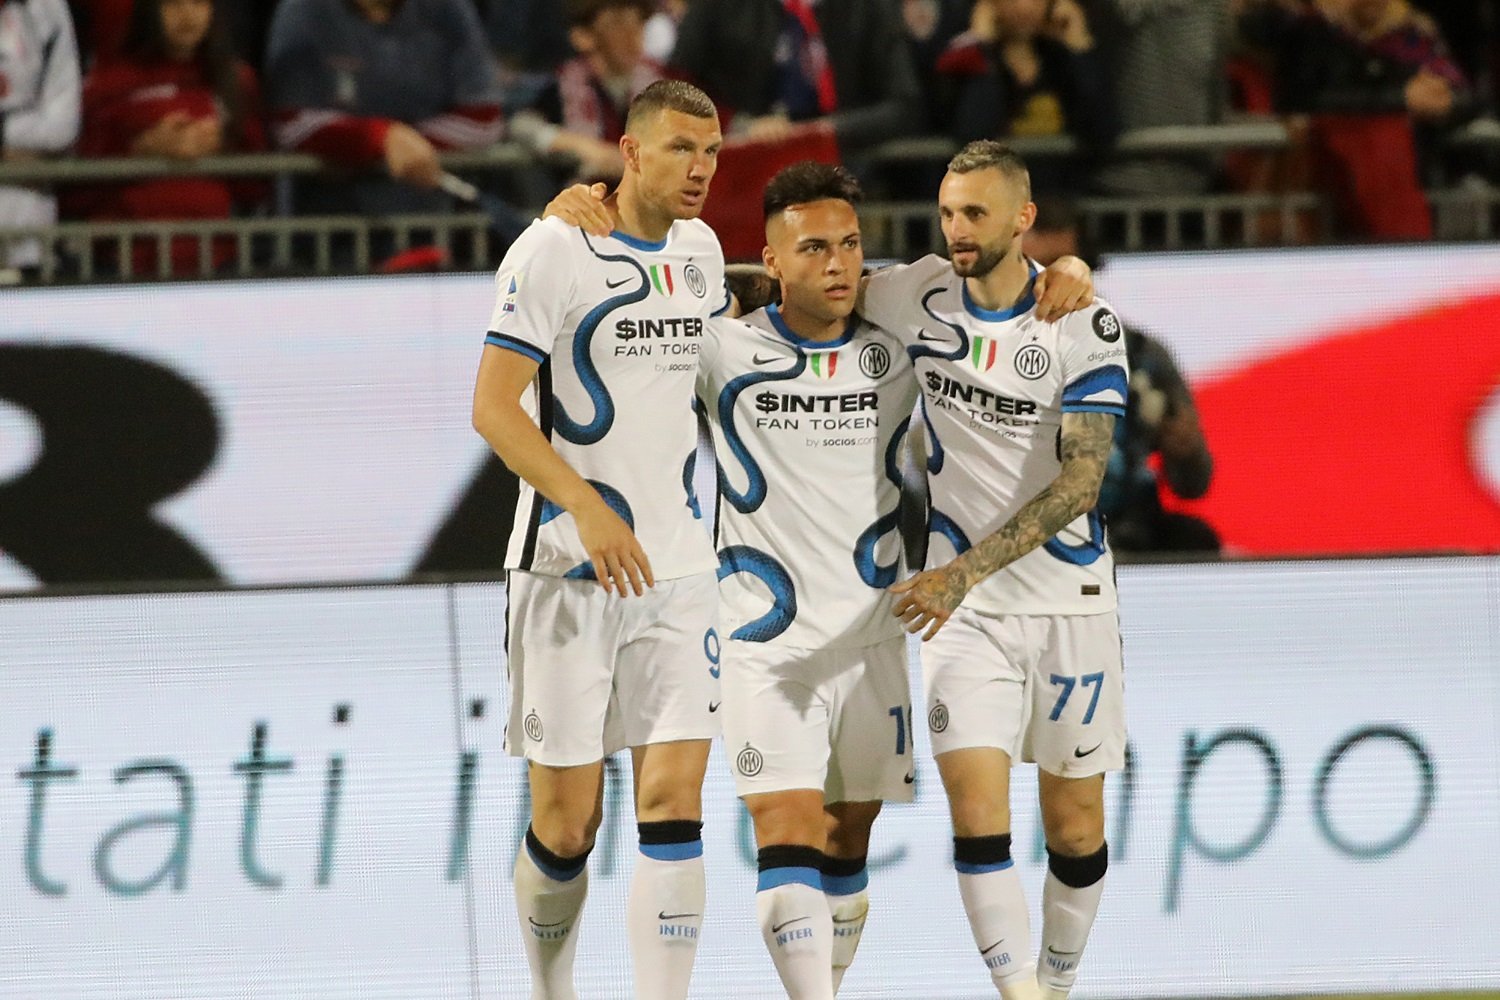 Serie A: Inter Milan beat Cagliari 3-1 as Serie A title race to be decided on LAST DAY, Lautaro Martinez scores brace, watch Inter Milan beat Cagliari